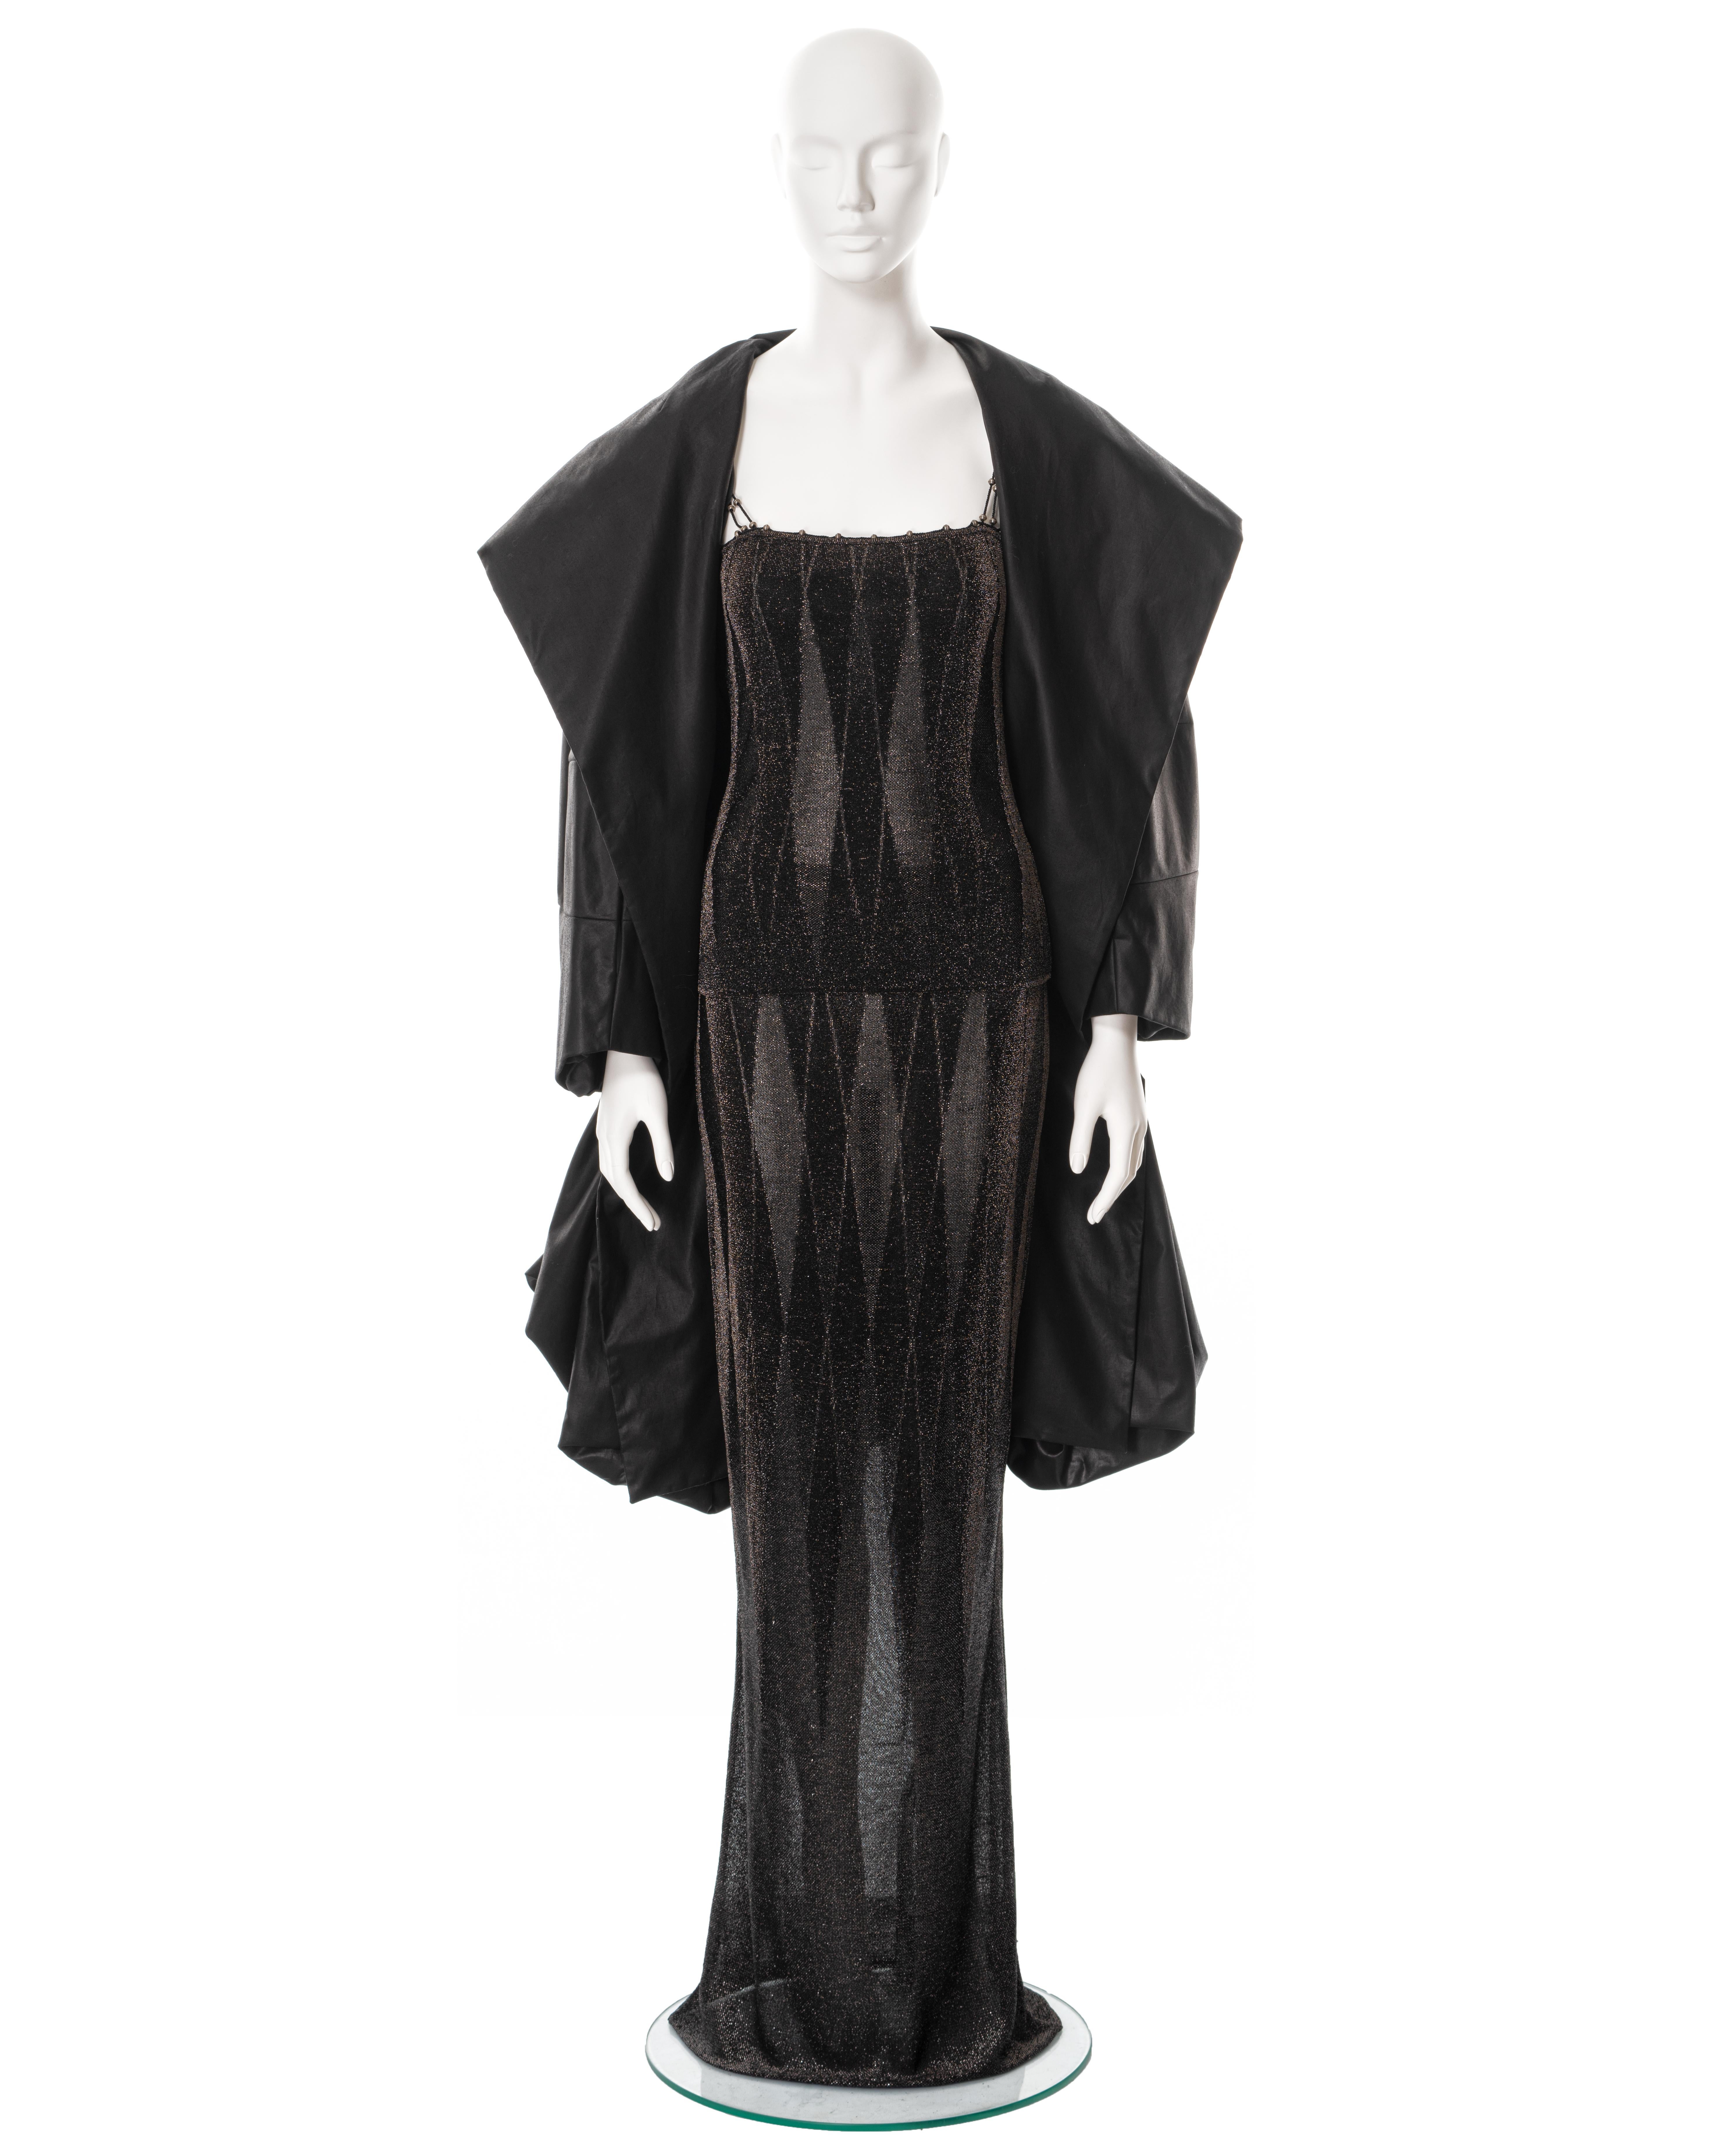 ▪ Christian Dior evening dress and coat ensemble 
▪ Designed by John Galliano
▪ Sold by One of a Kind Archive
▪ Dress comprises a skirt and top constructed from metallic black lurex jersey with sheer diamond pattern
▪ Double shoulder straps with